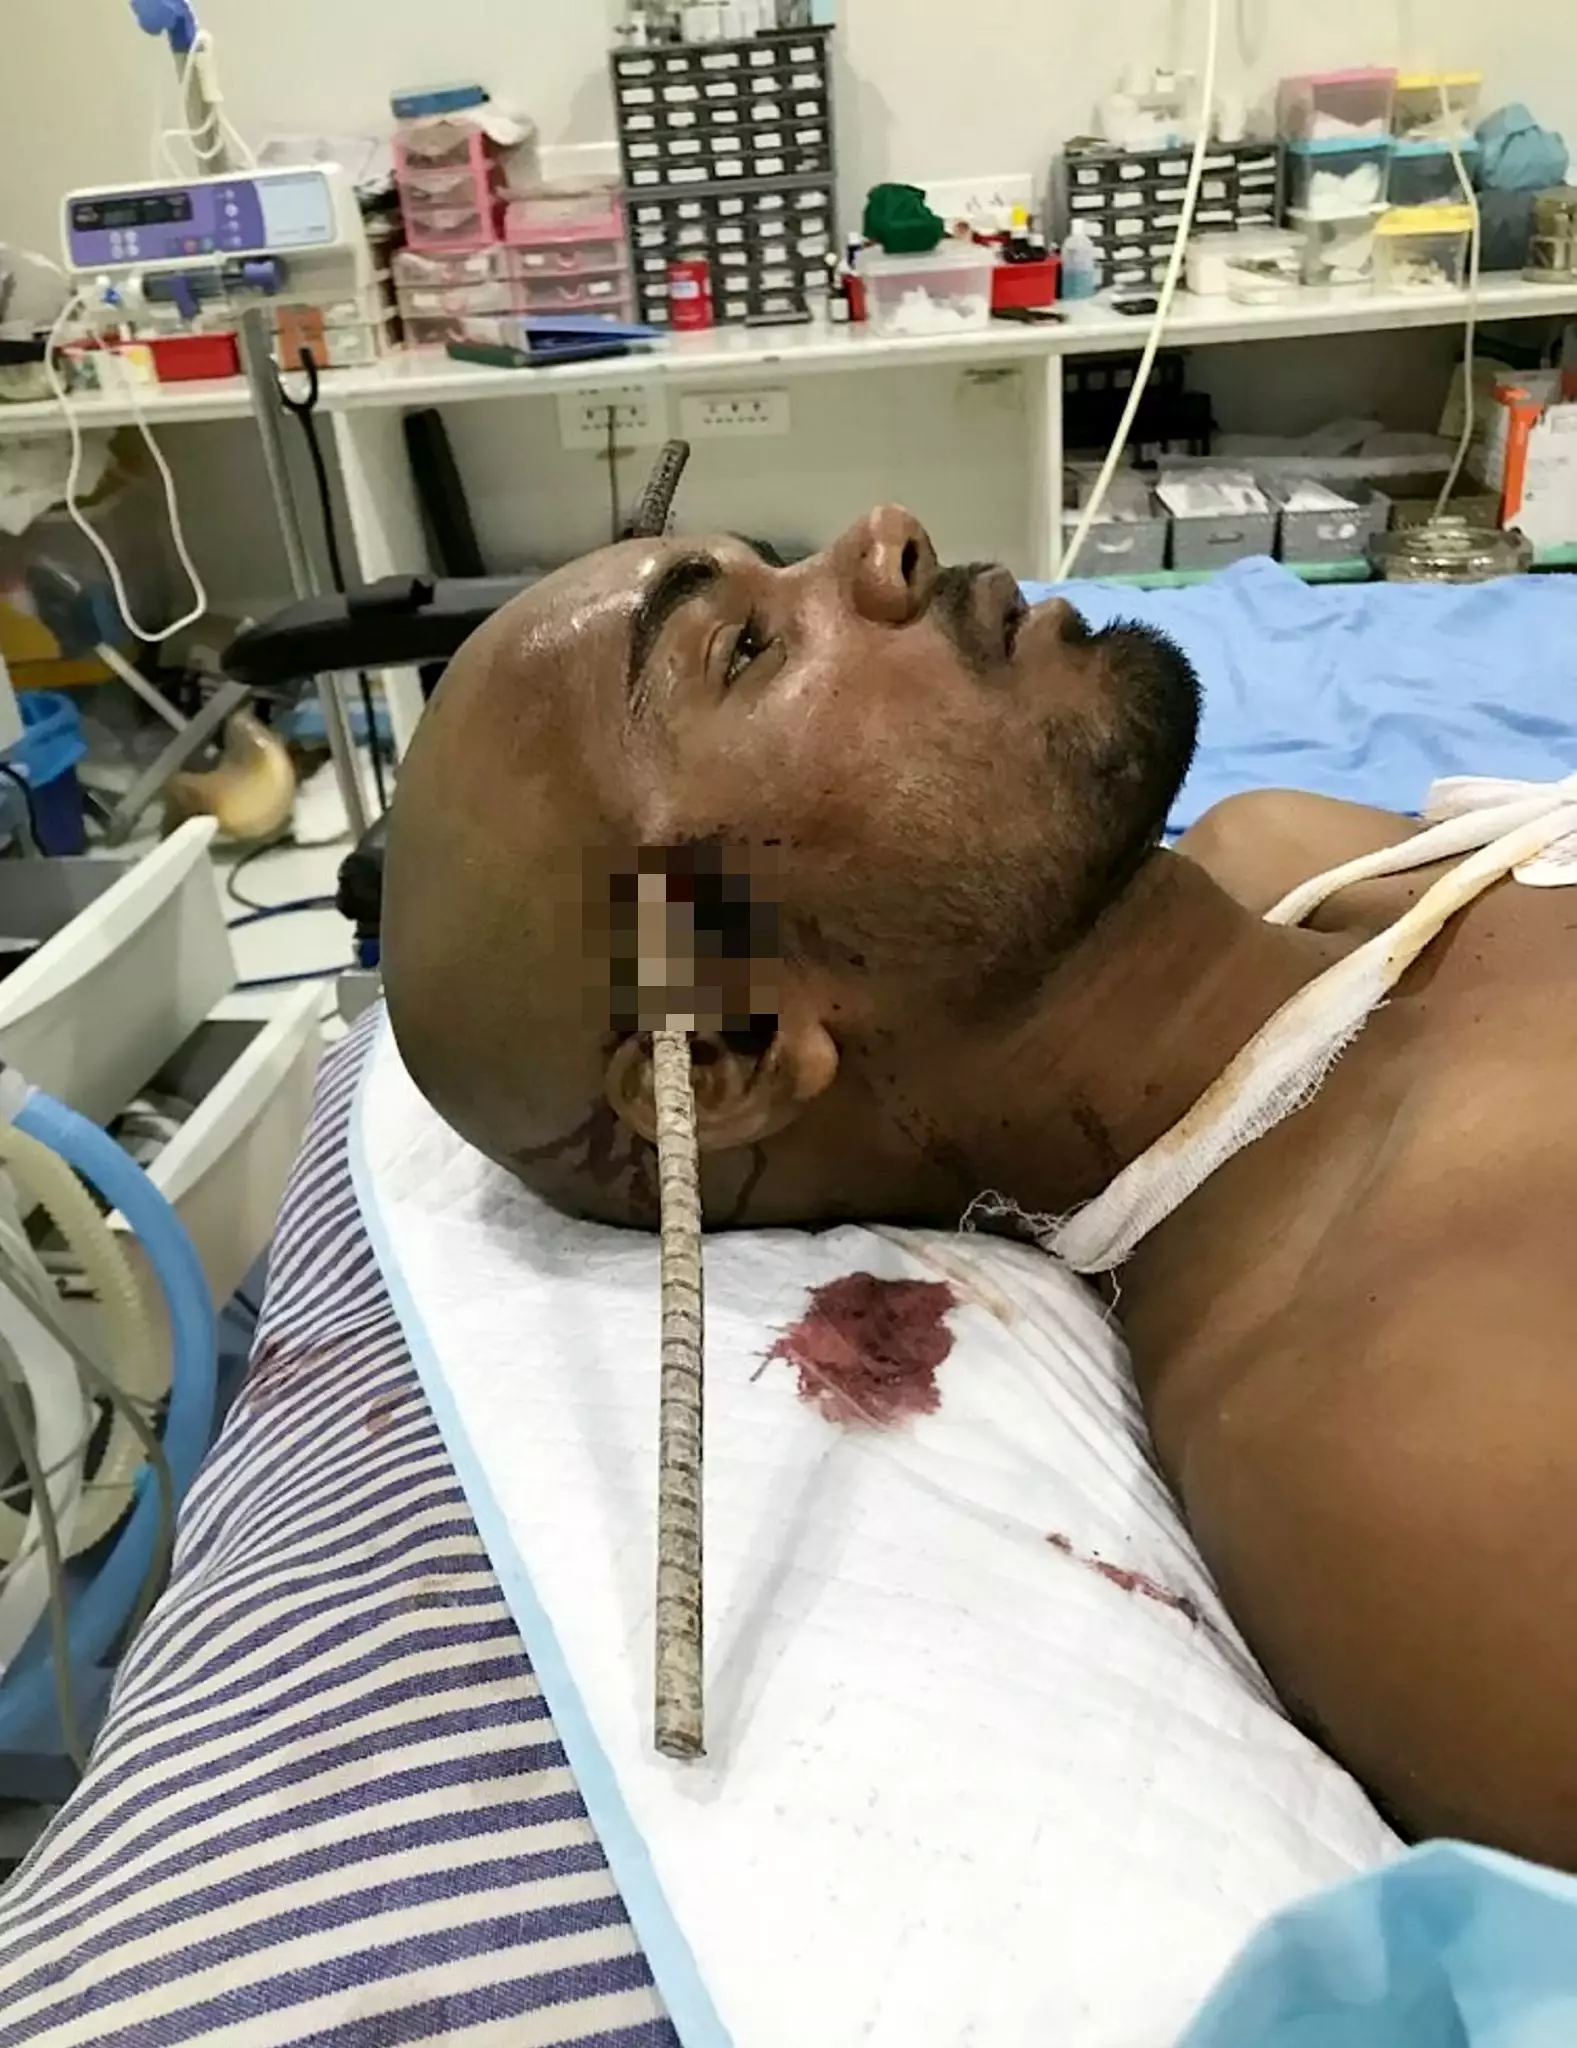 Sanjay Bahe's injuries after he was impaled through the head.